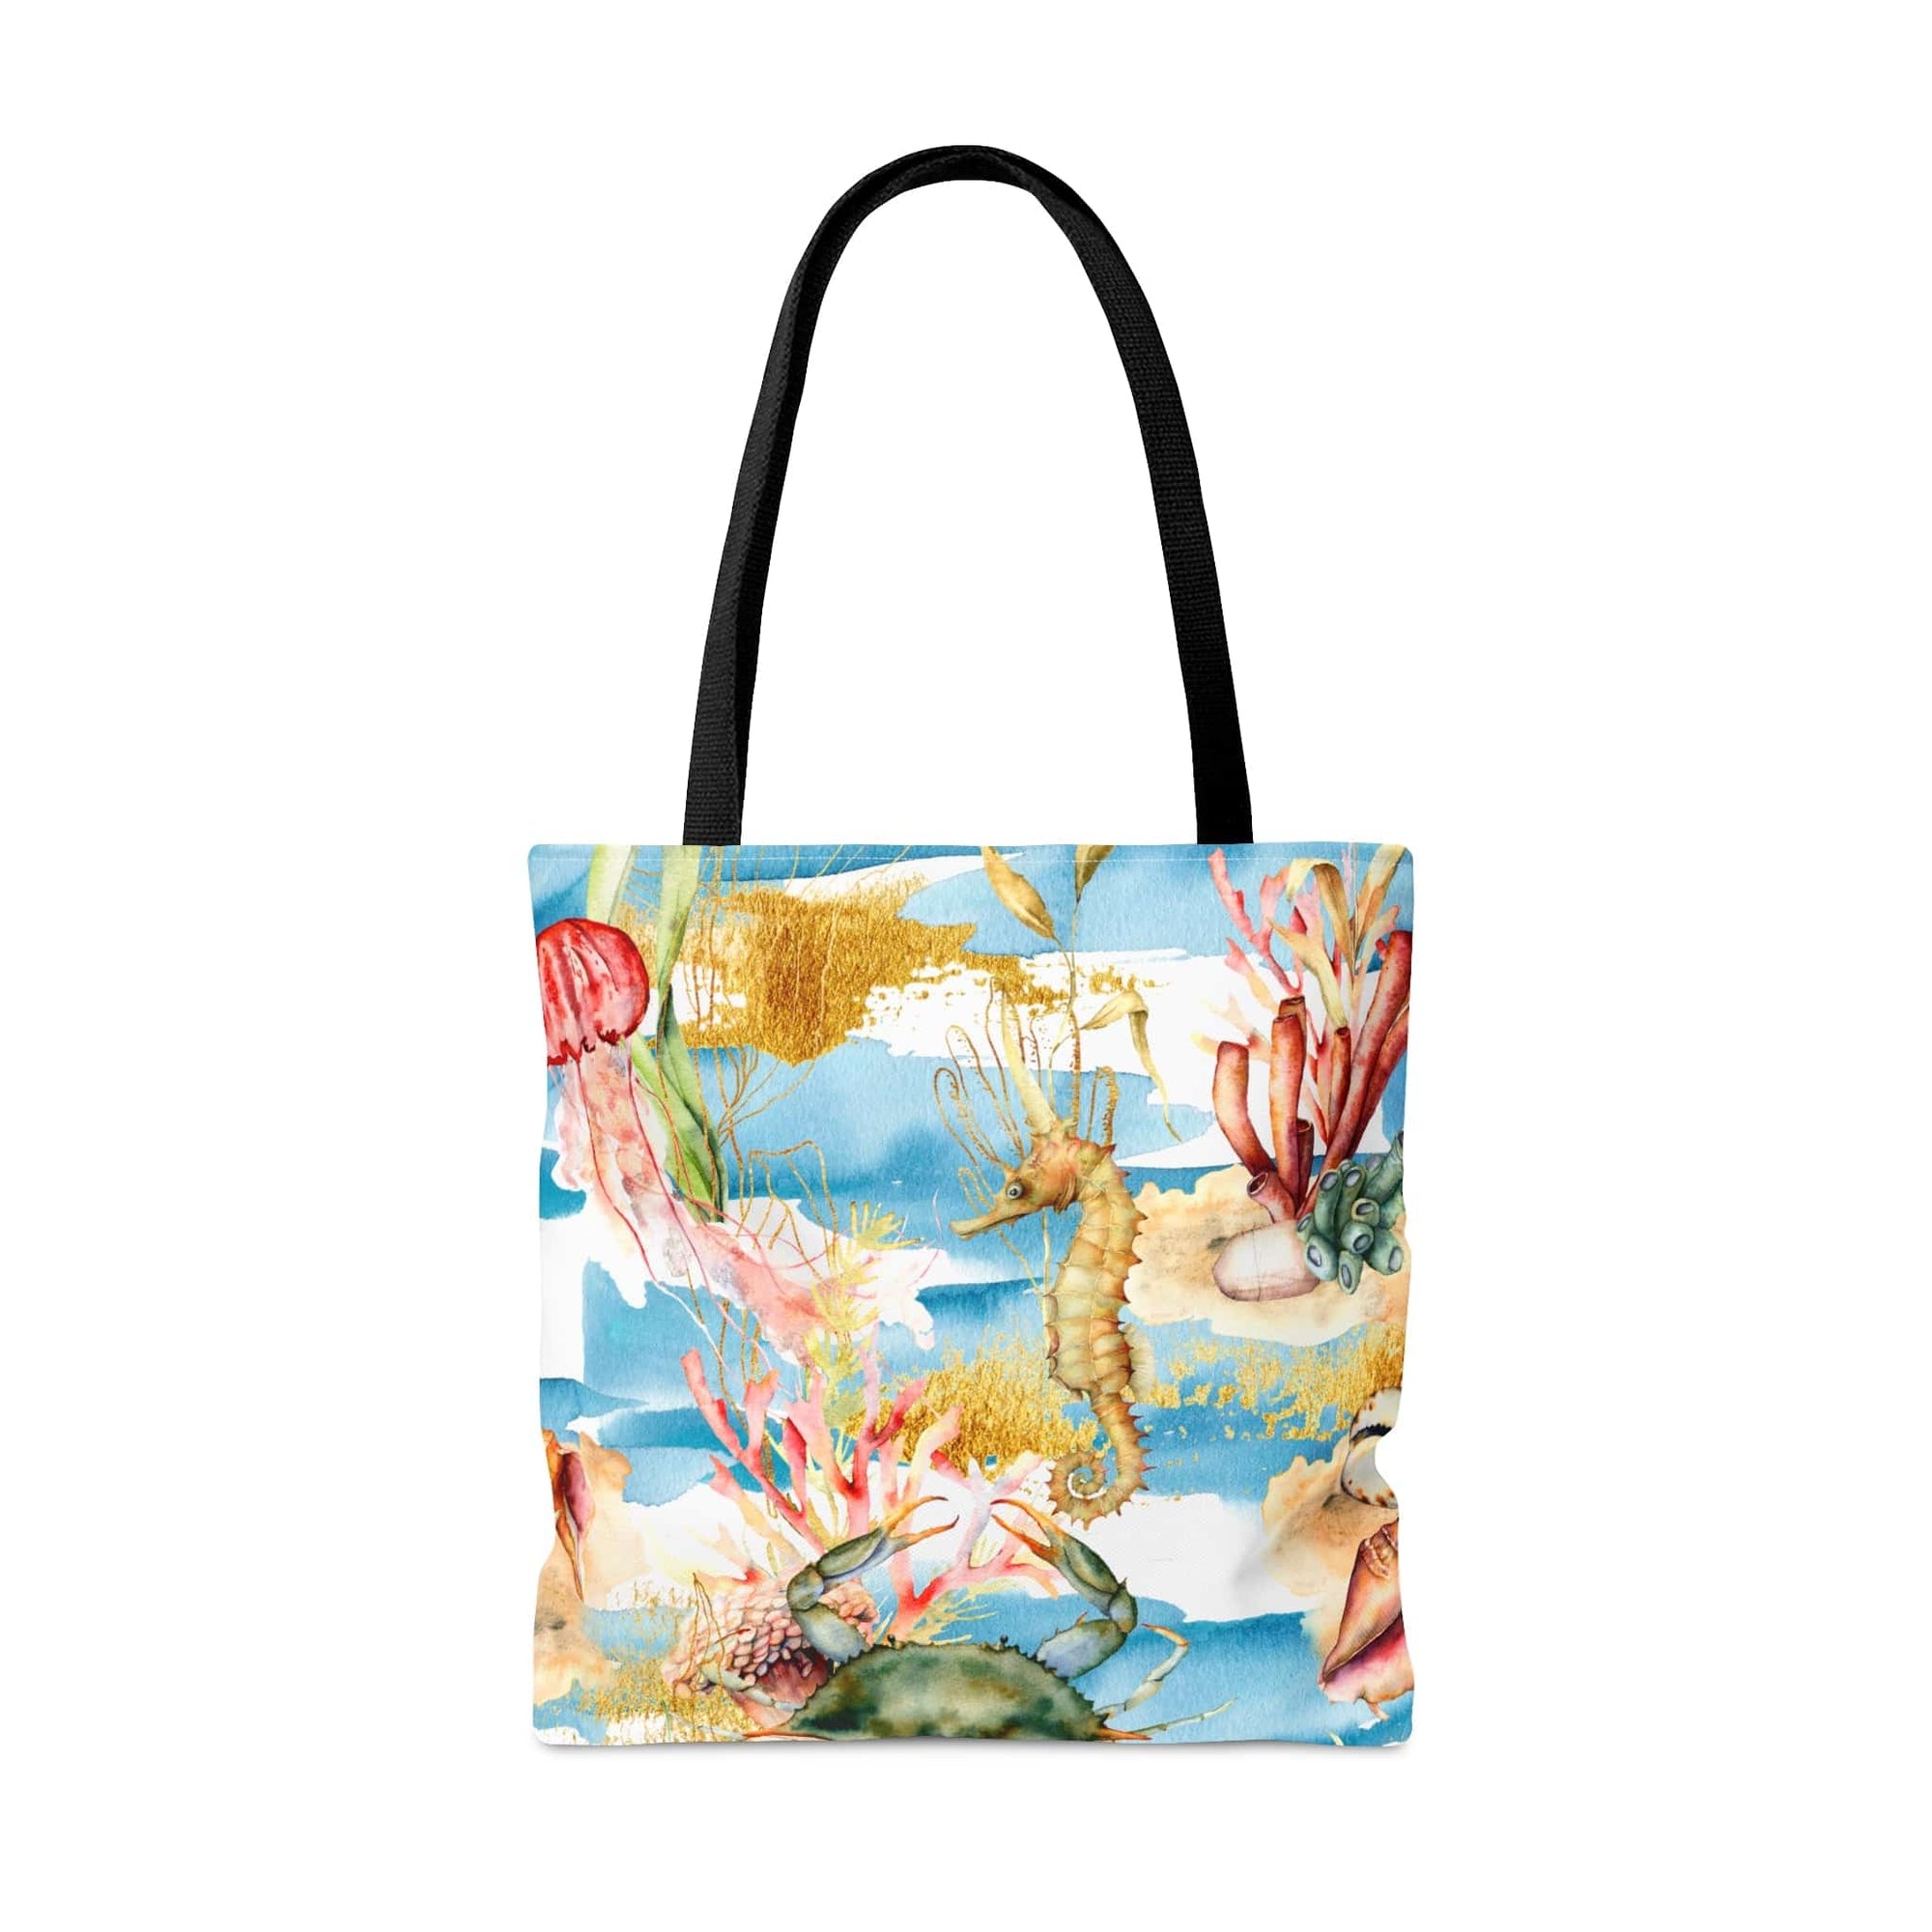 A Day at The Beach Tote Bag - Mountains & Mermaids